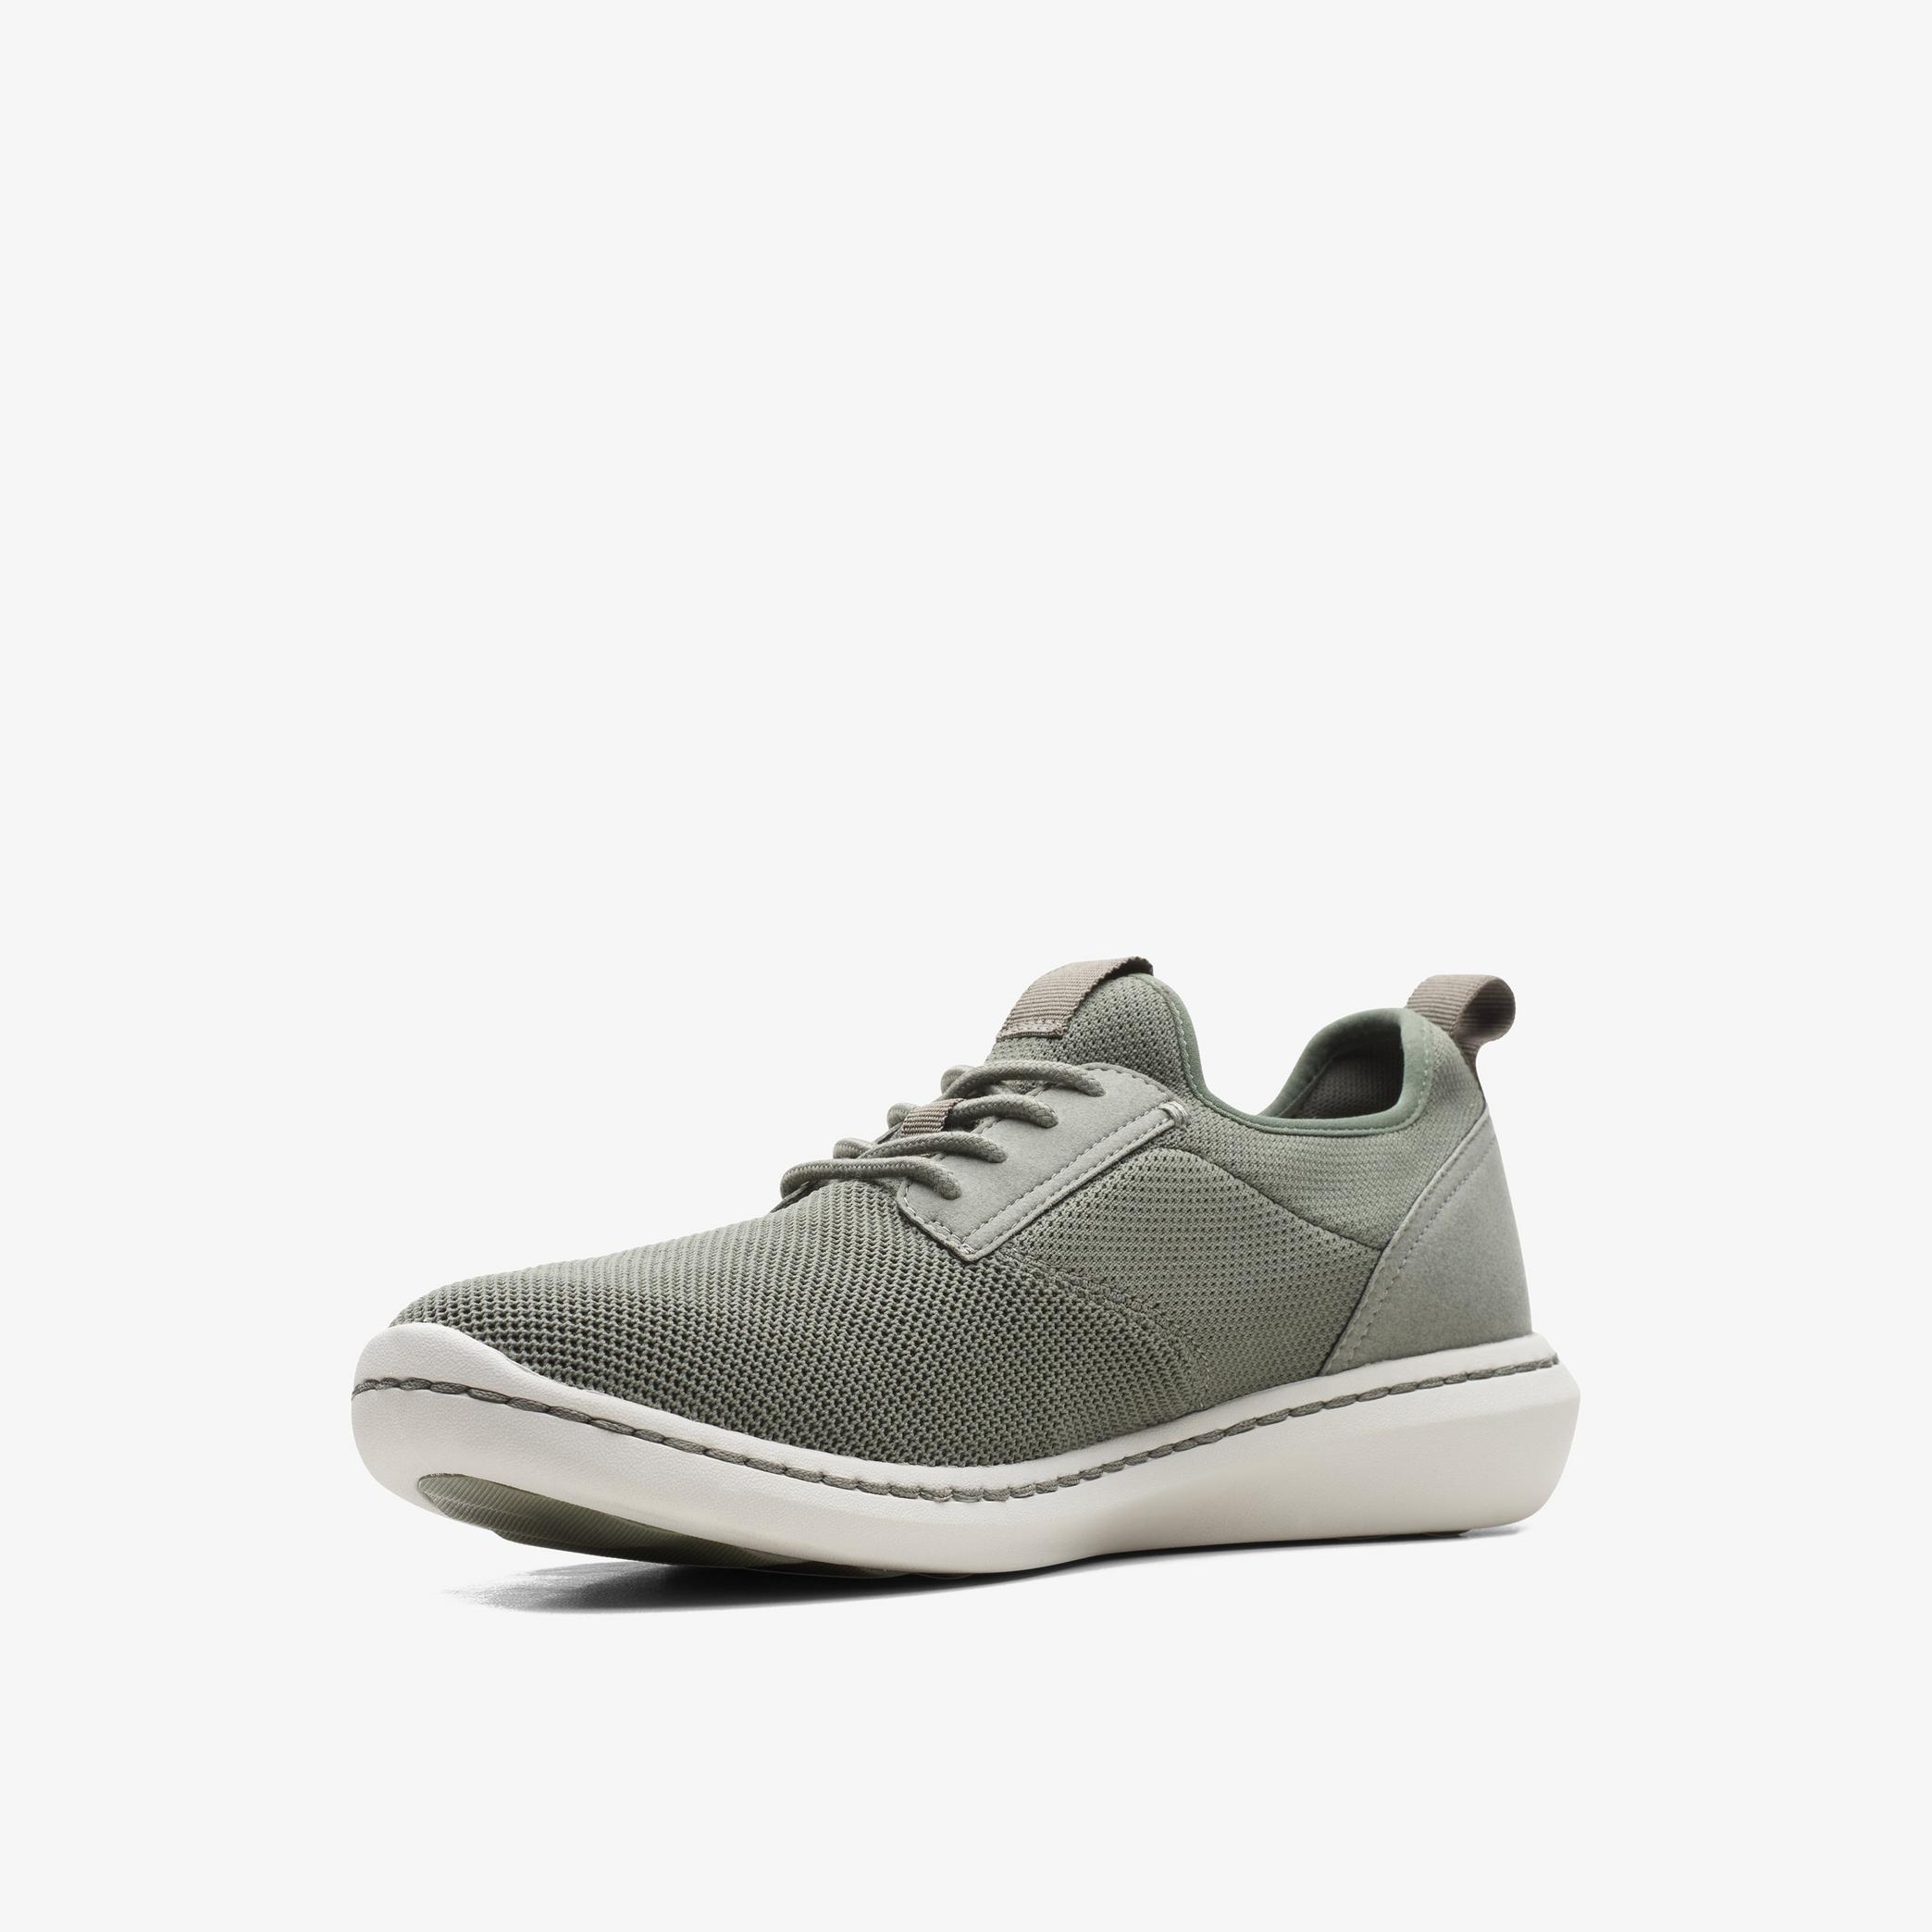 Step Urban Low Olive Textile Shoes, view 4 of 6